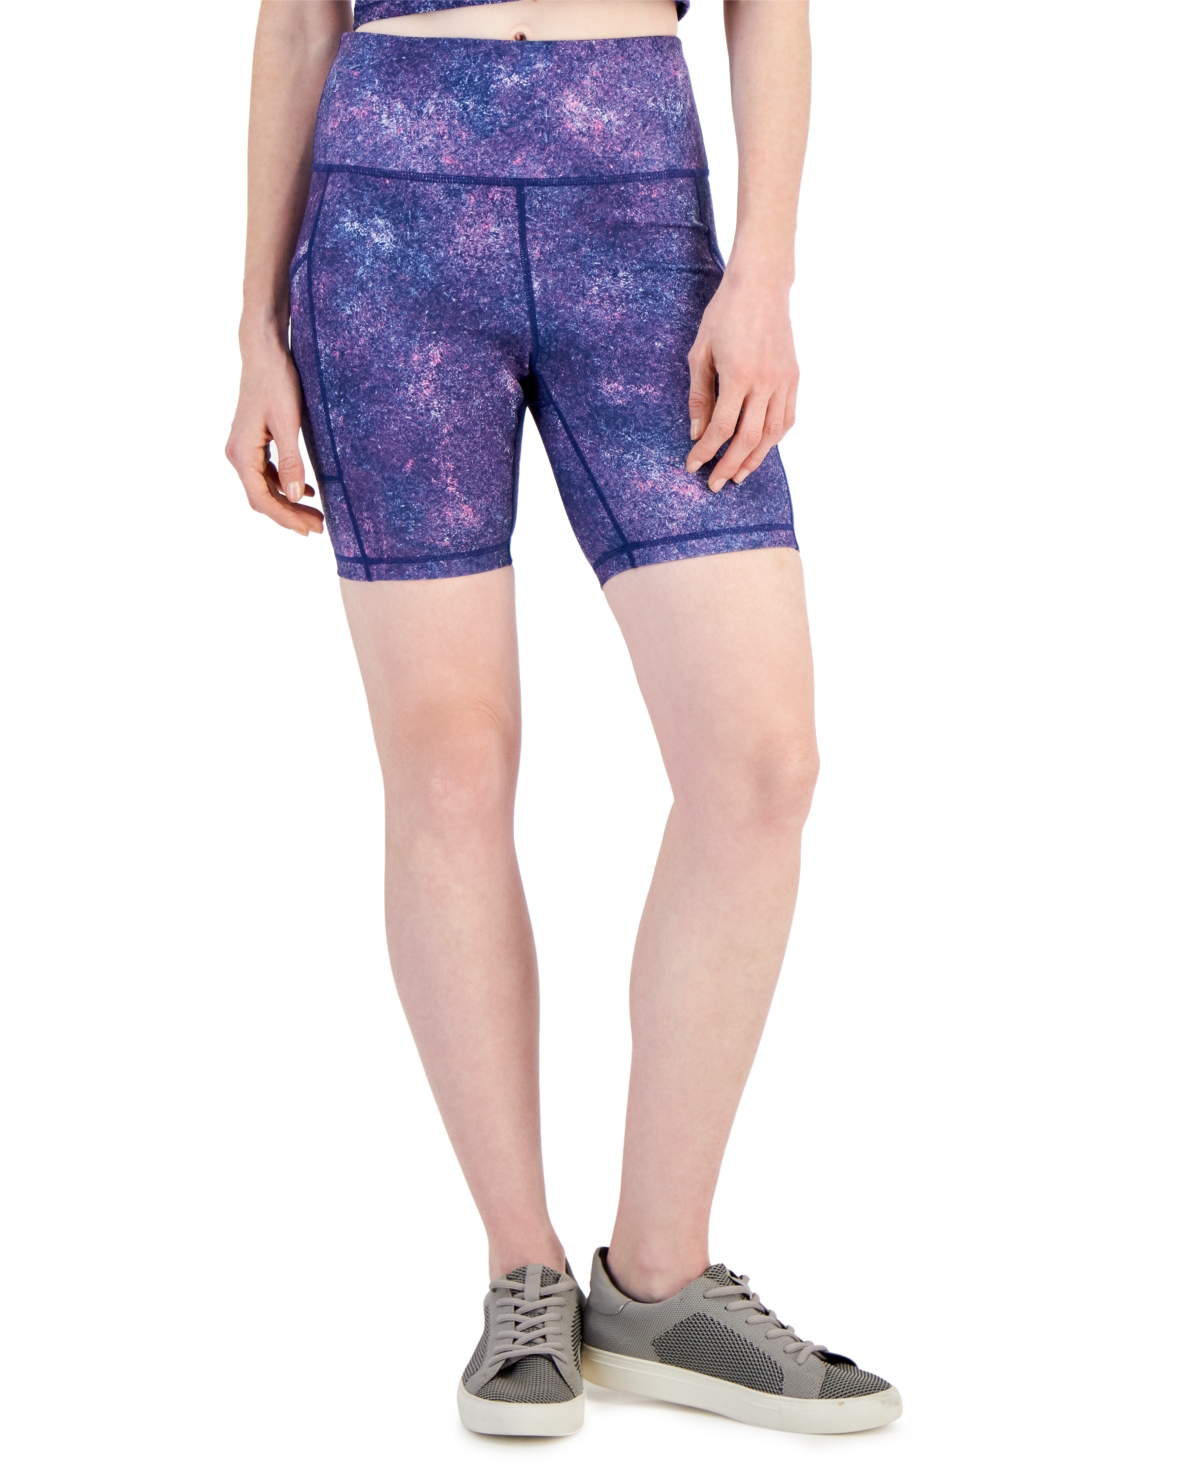 Women's Printed Bike Shorts, Created for Macy's - Berry Patch